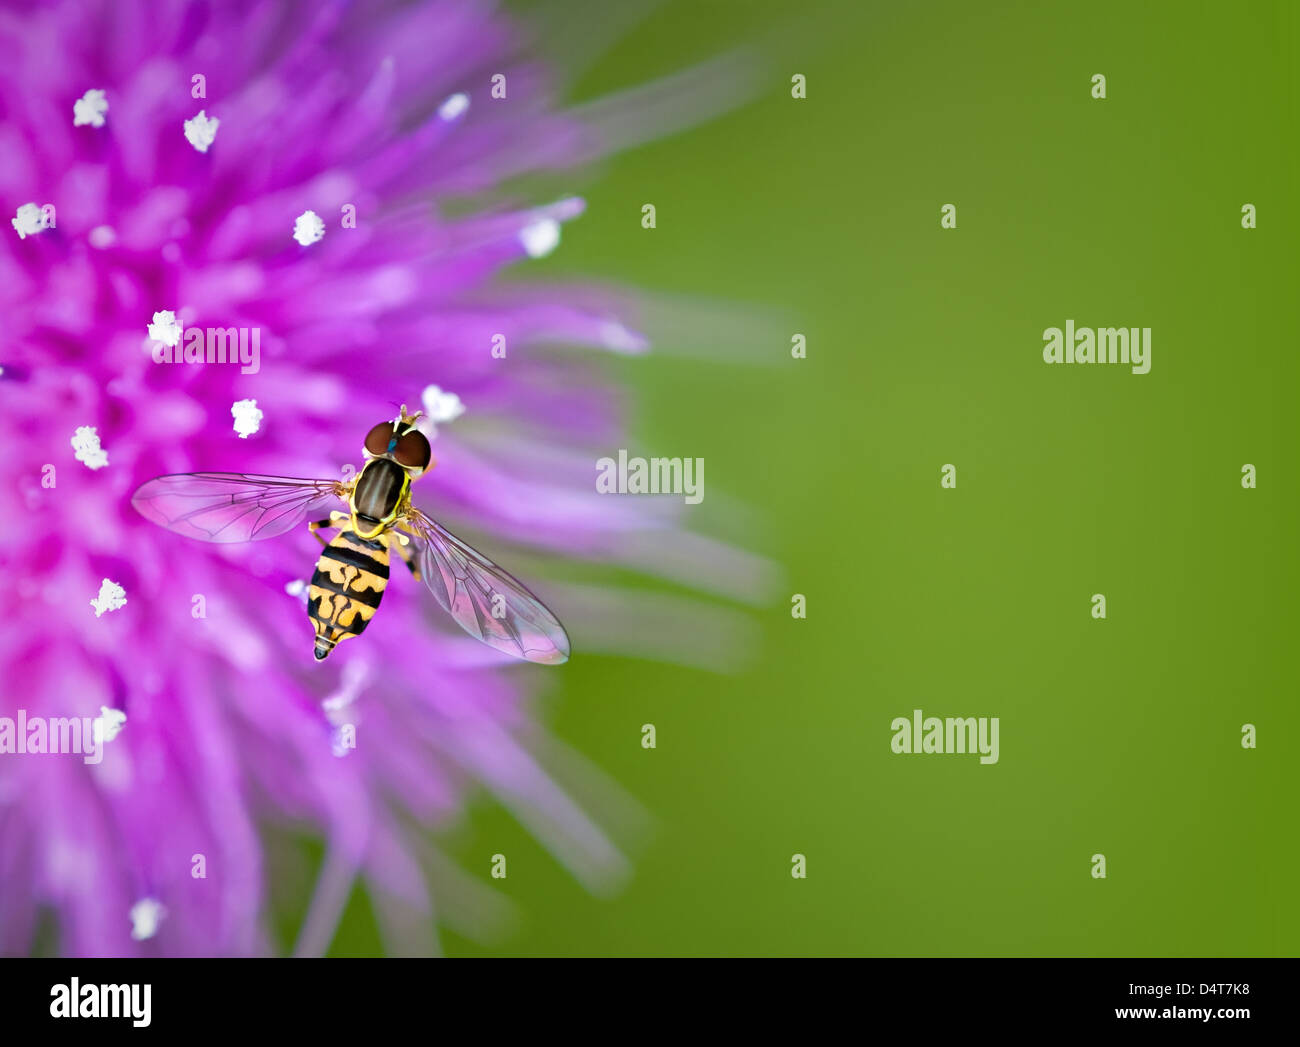 Hoverfly on thistle flower against green background with copy space Stock Photo